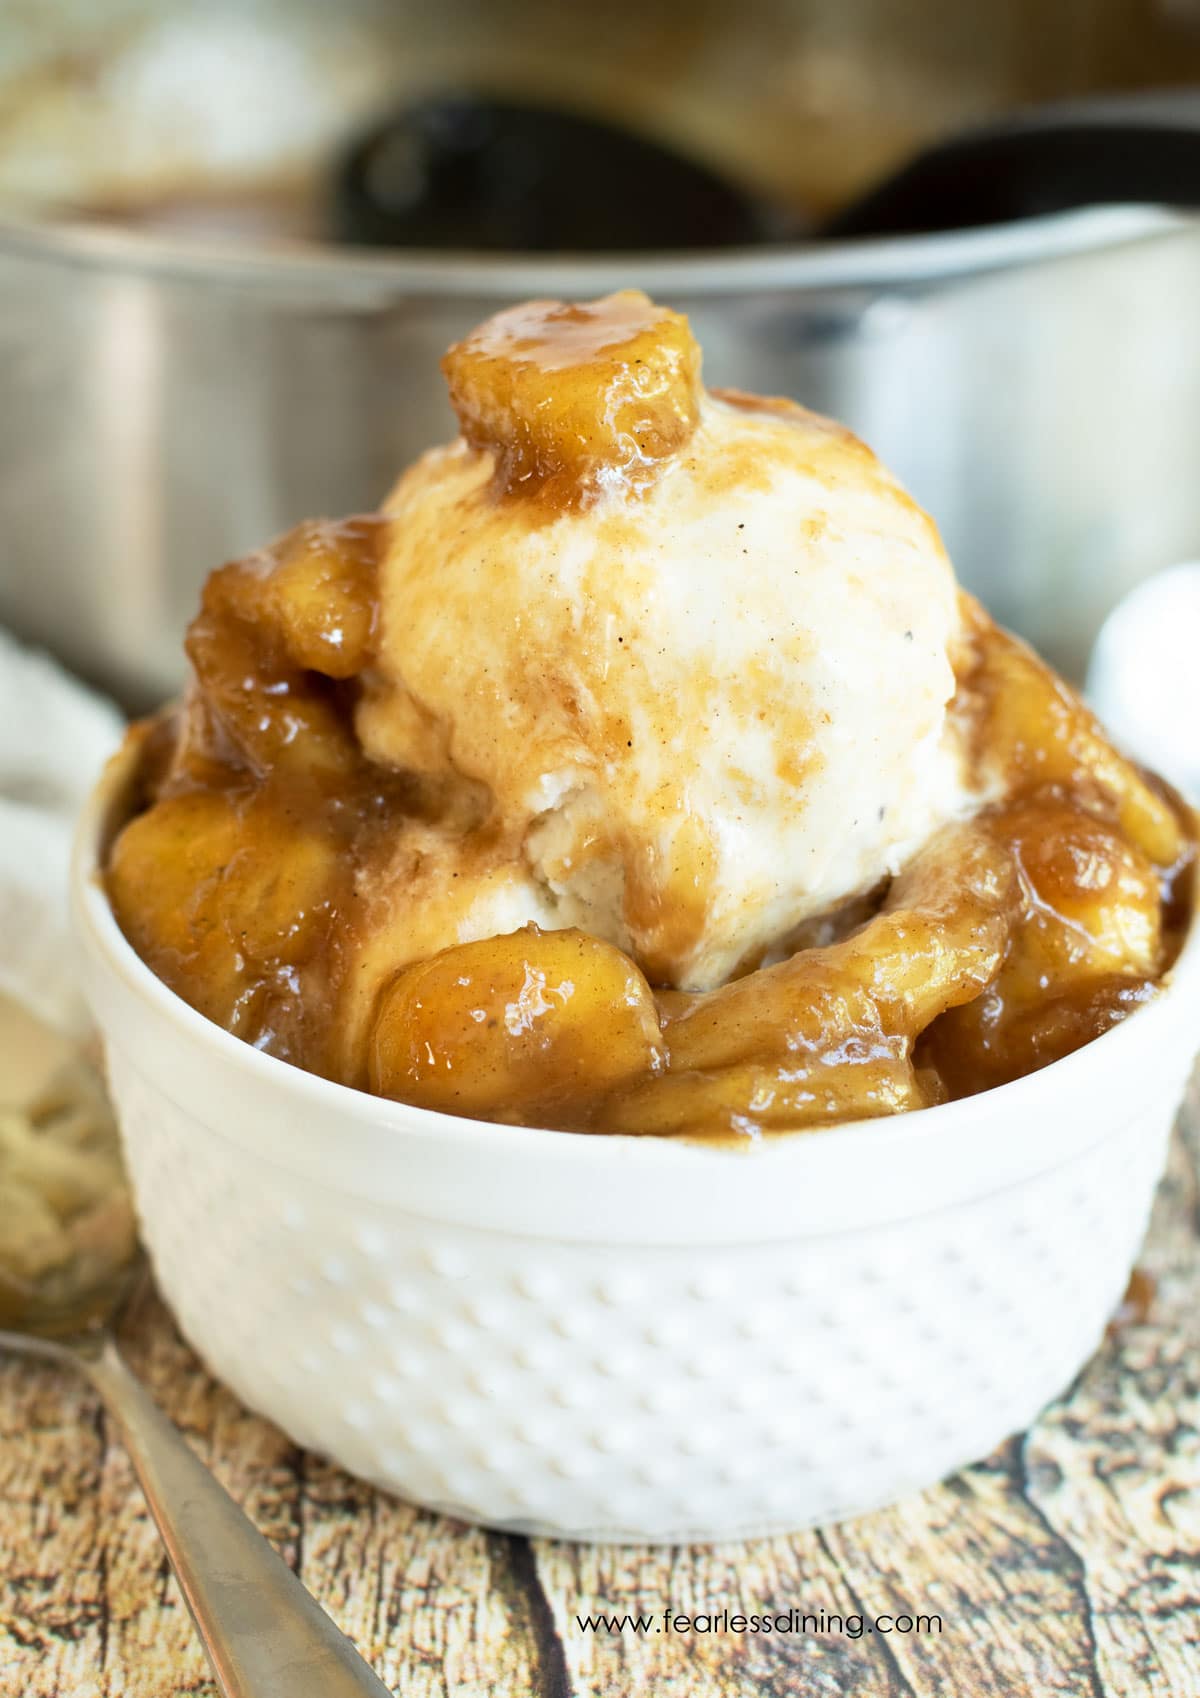 A white bowl filled with ice cream and caramelized bananas.